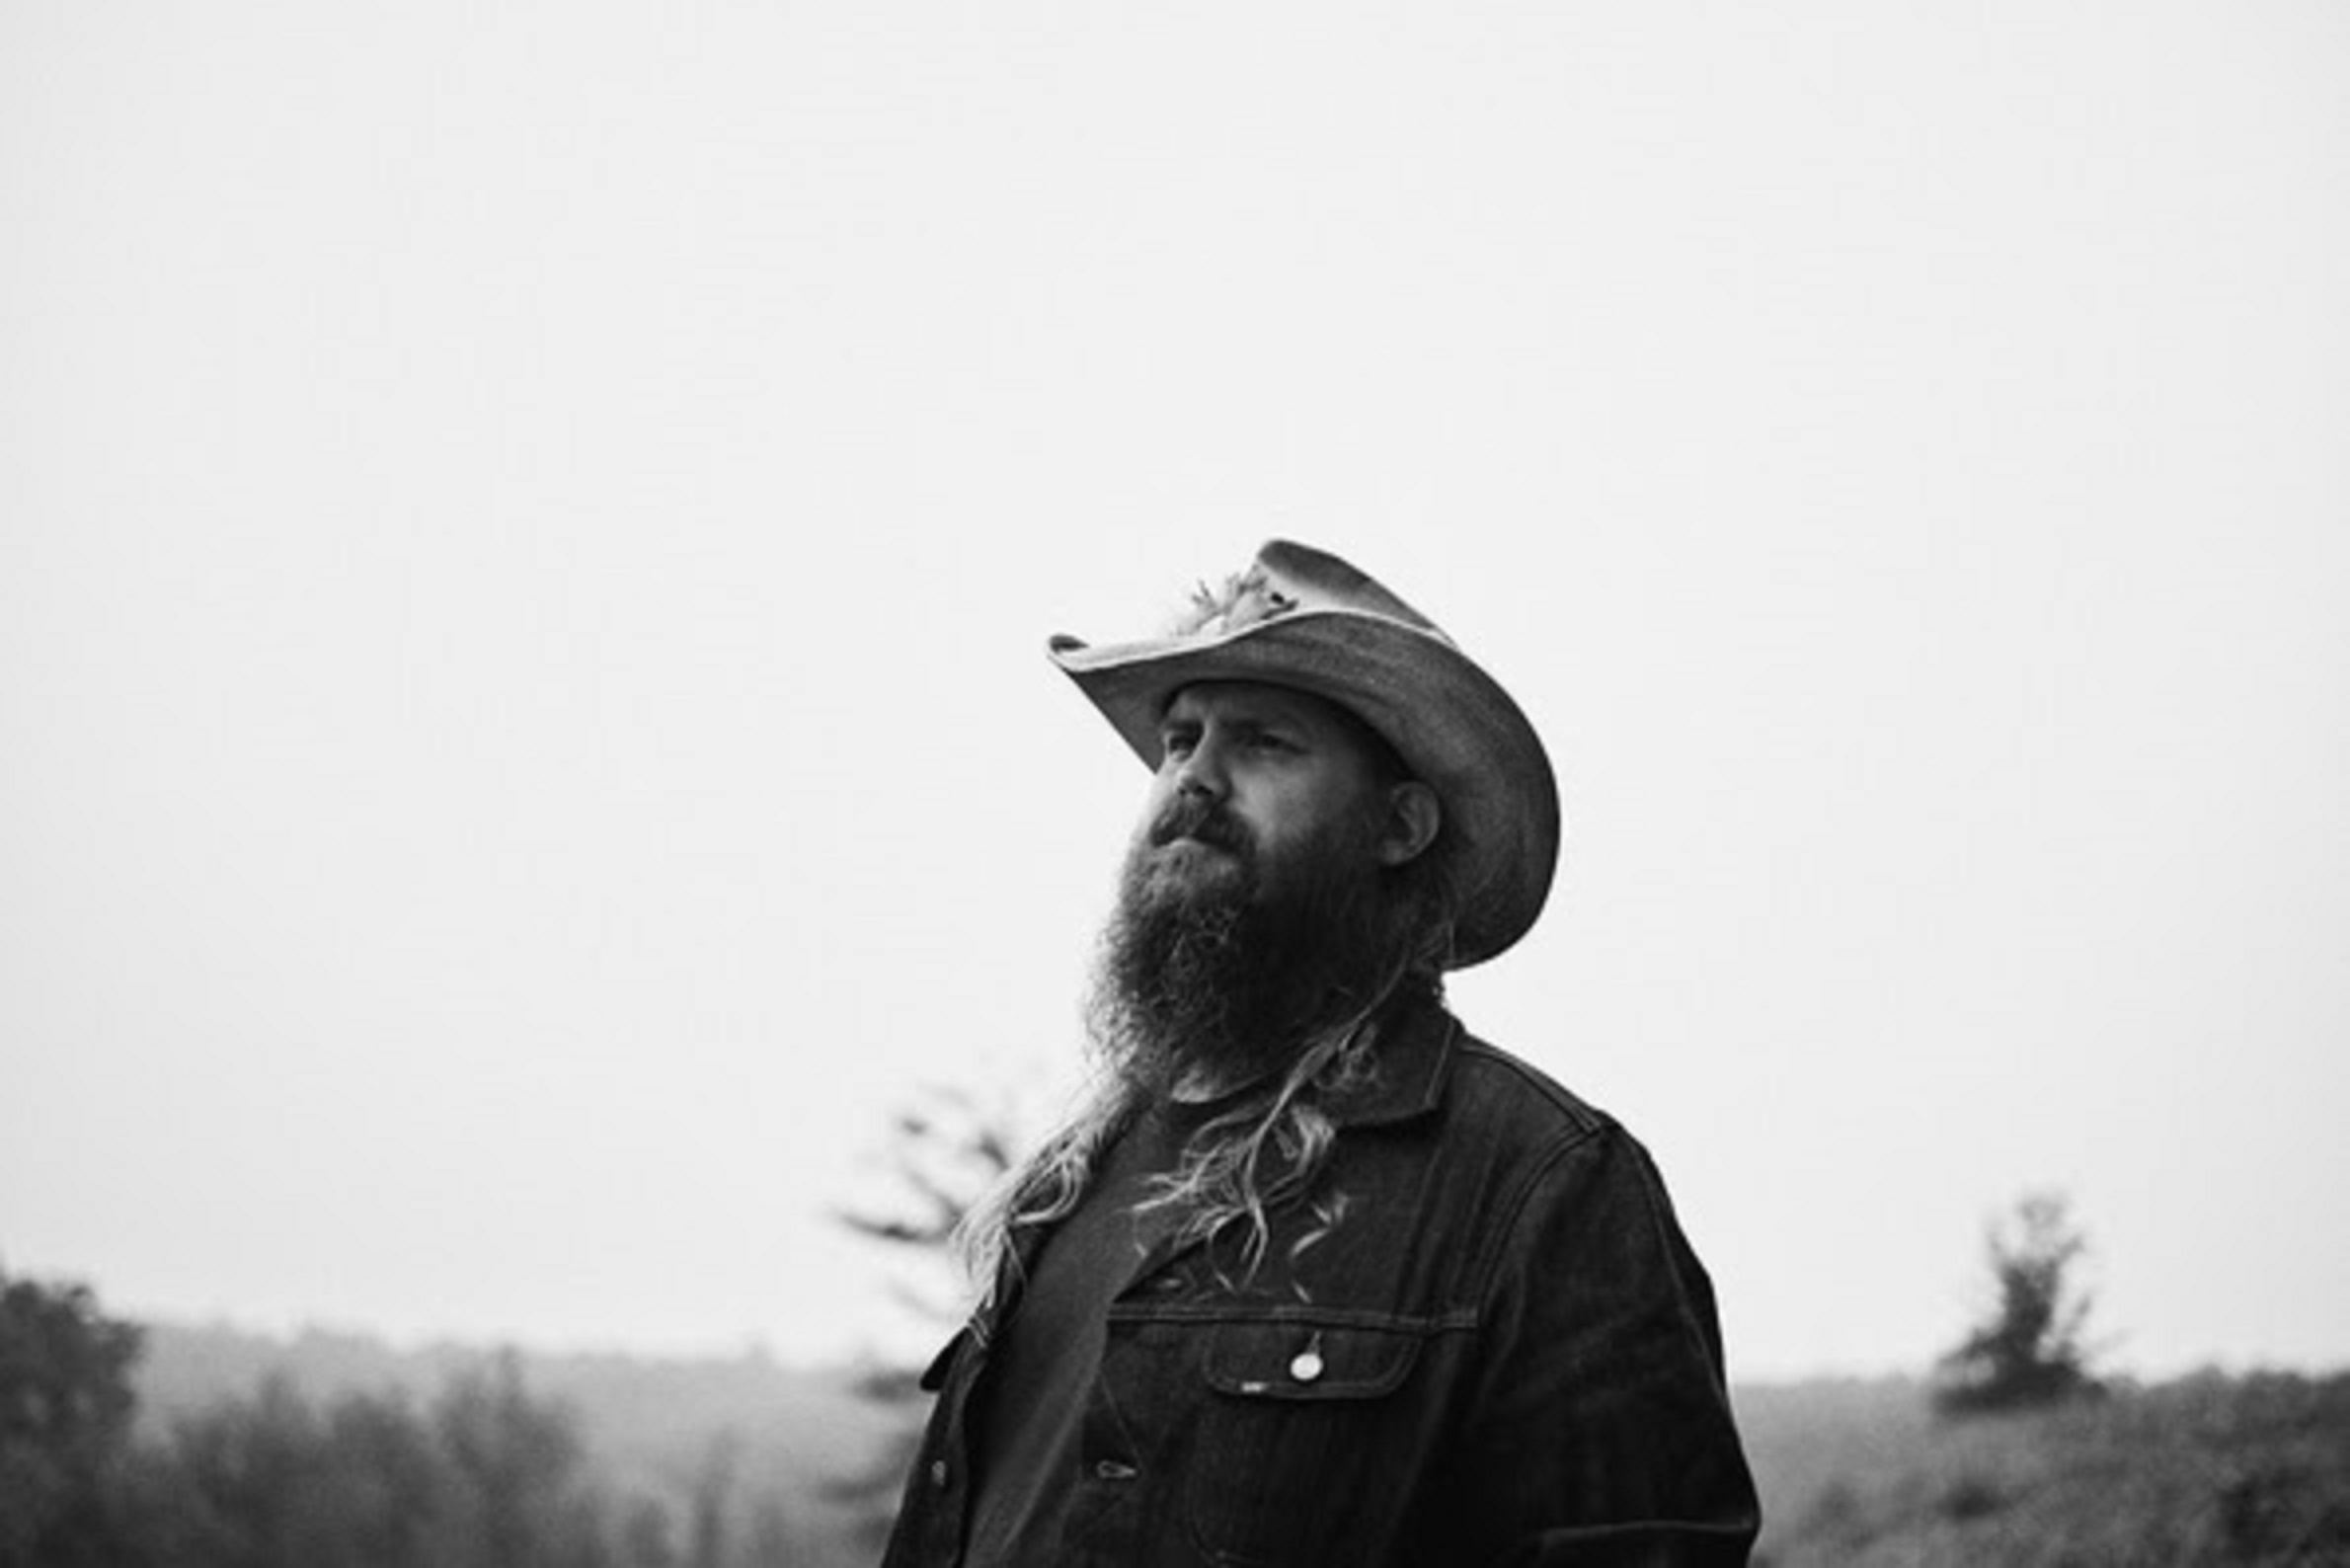 Chris Stapleton nominated for three awards at 64th Annual GRAMMY Awards